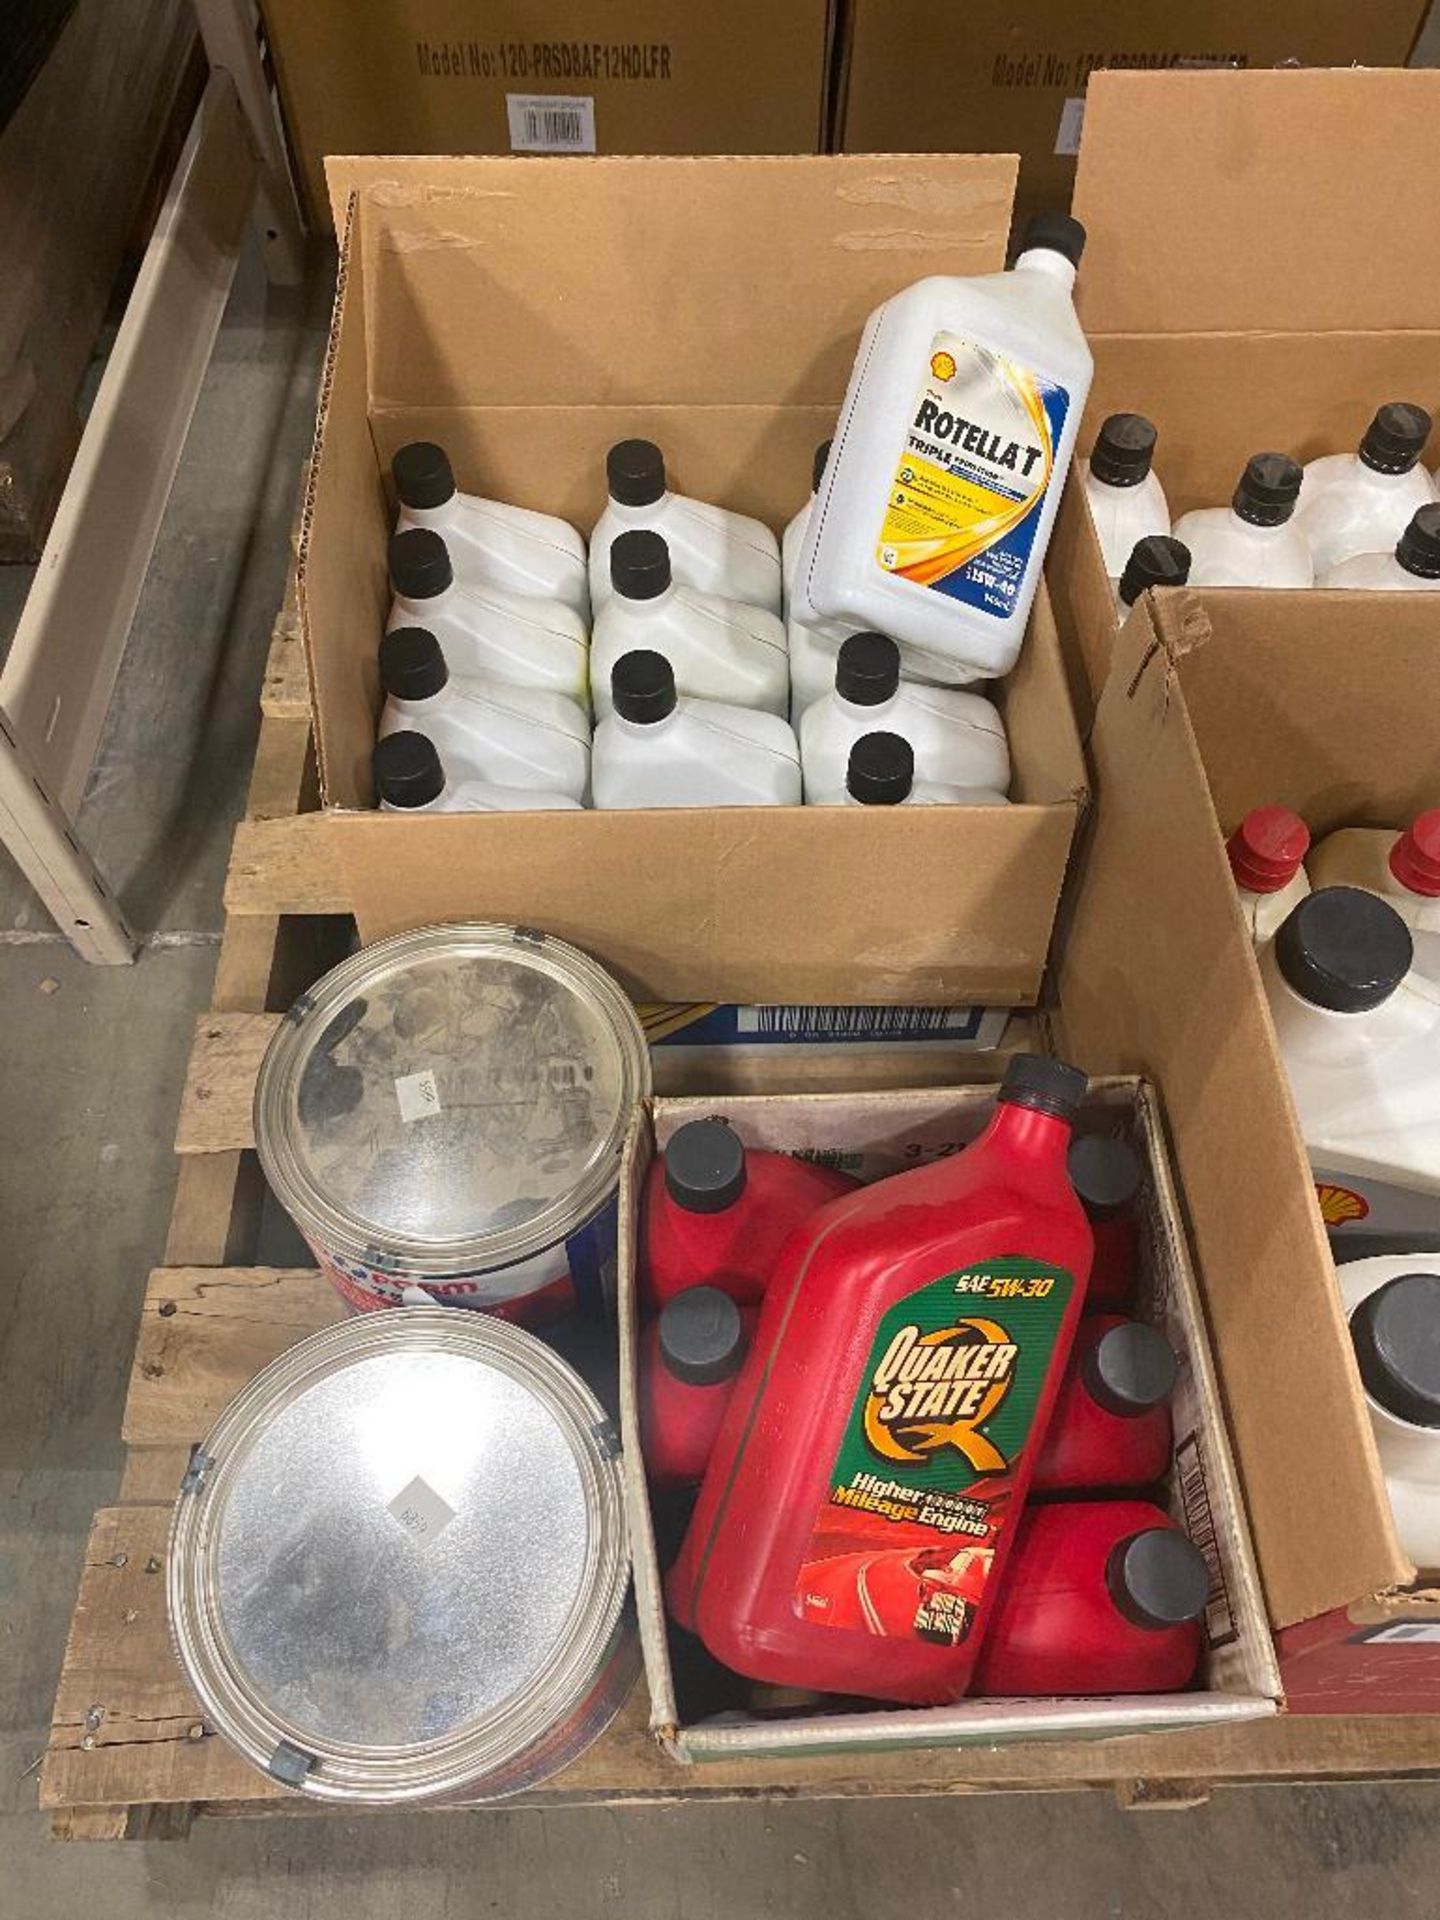 Pallet of Asst. Fluids including 5W-30 Oil, SAE 10W Oil, 15W-40 Oil, Brushable Chunky Coating, etc. - Image 3 of 4